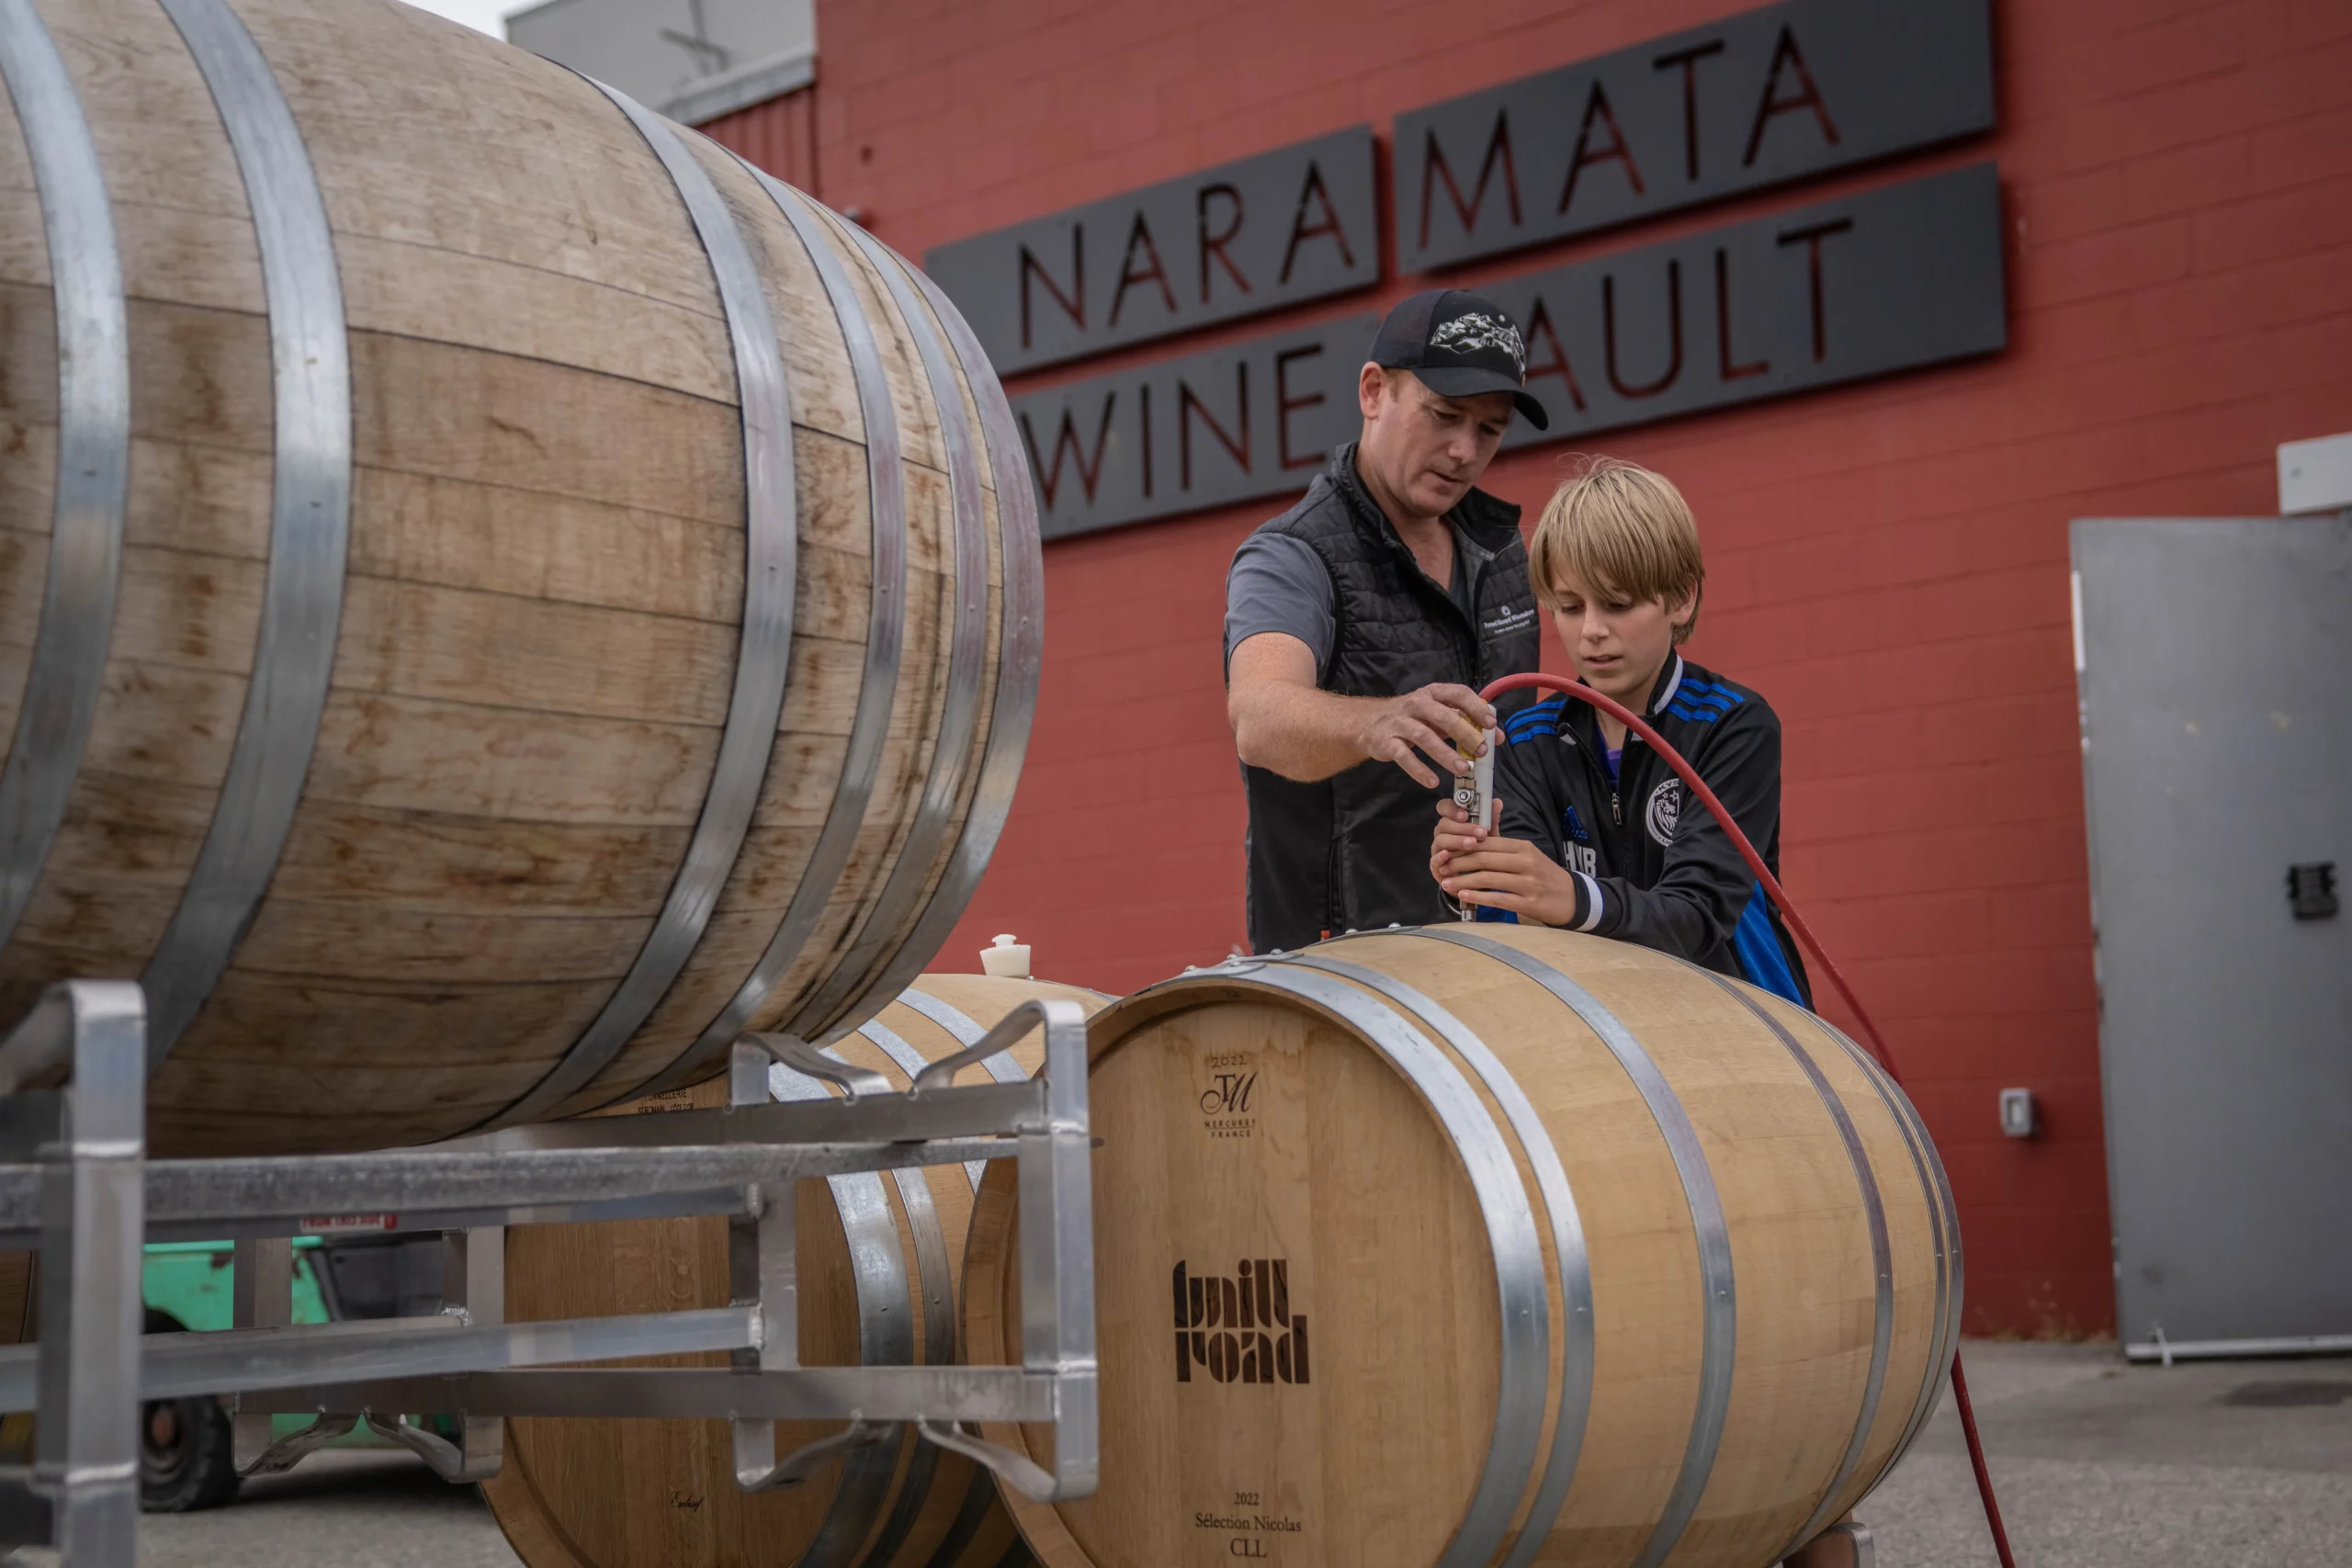 Ben and his son filling a wine barrel together